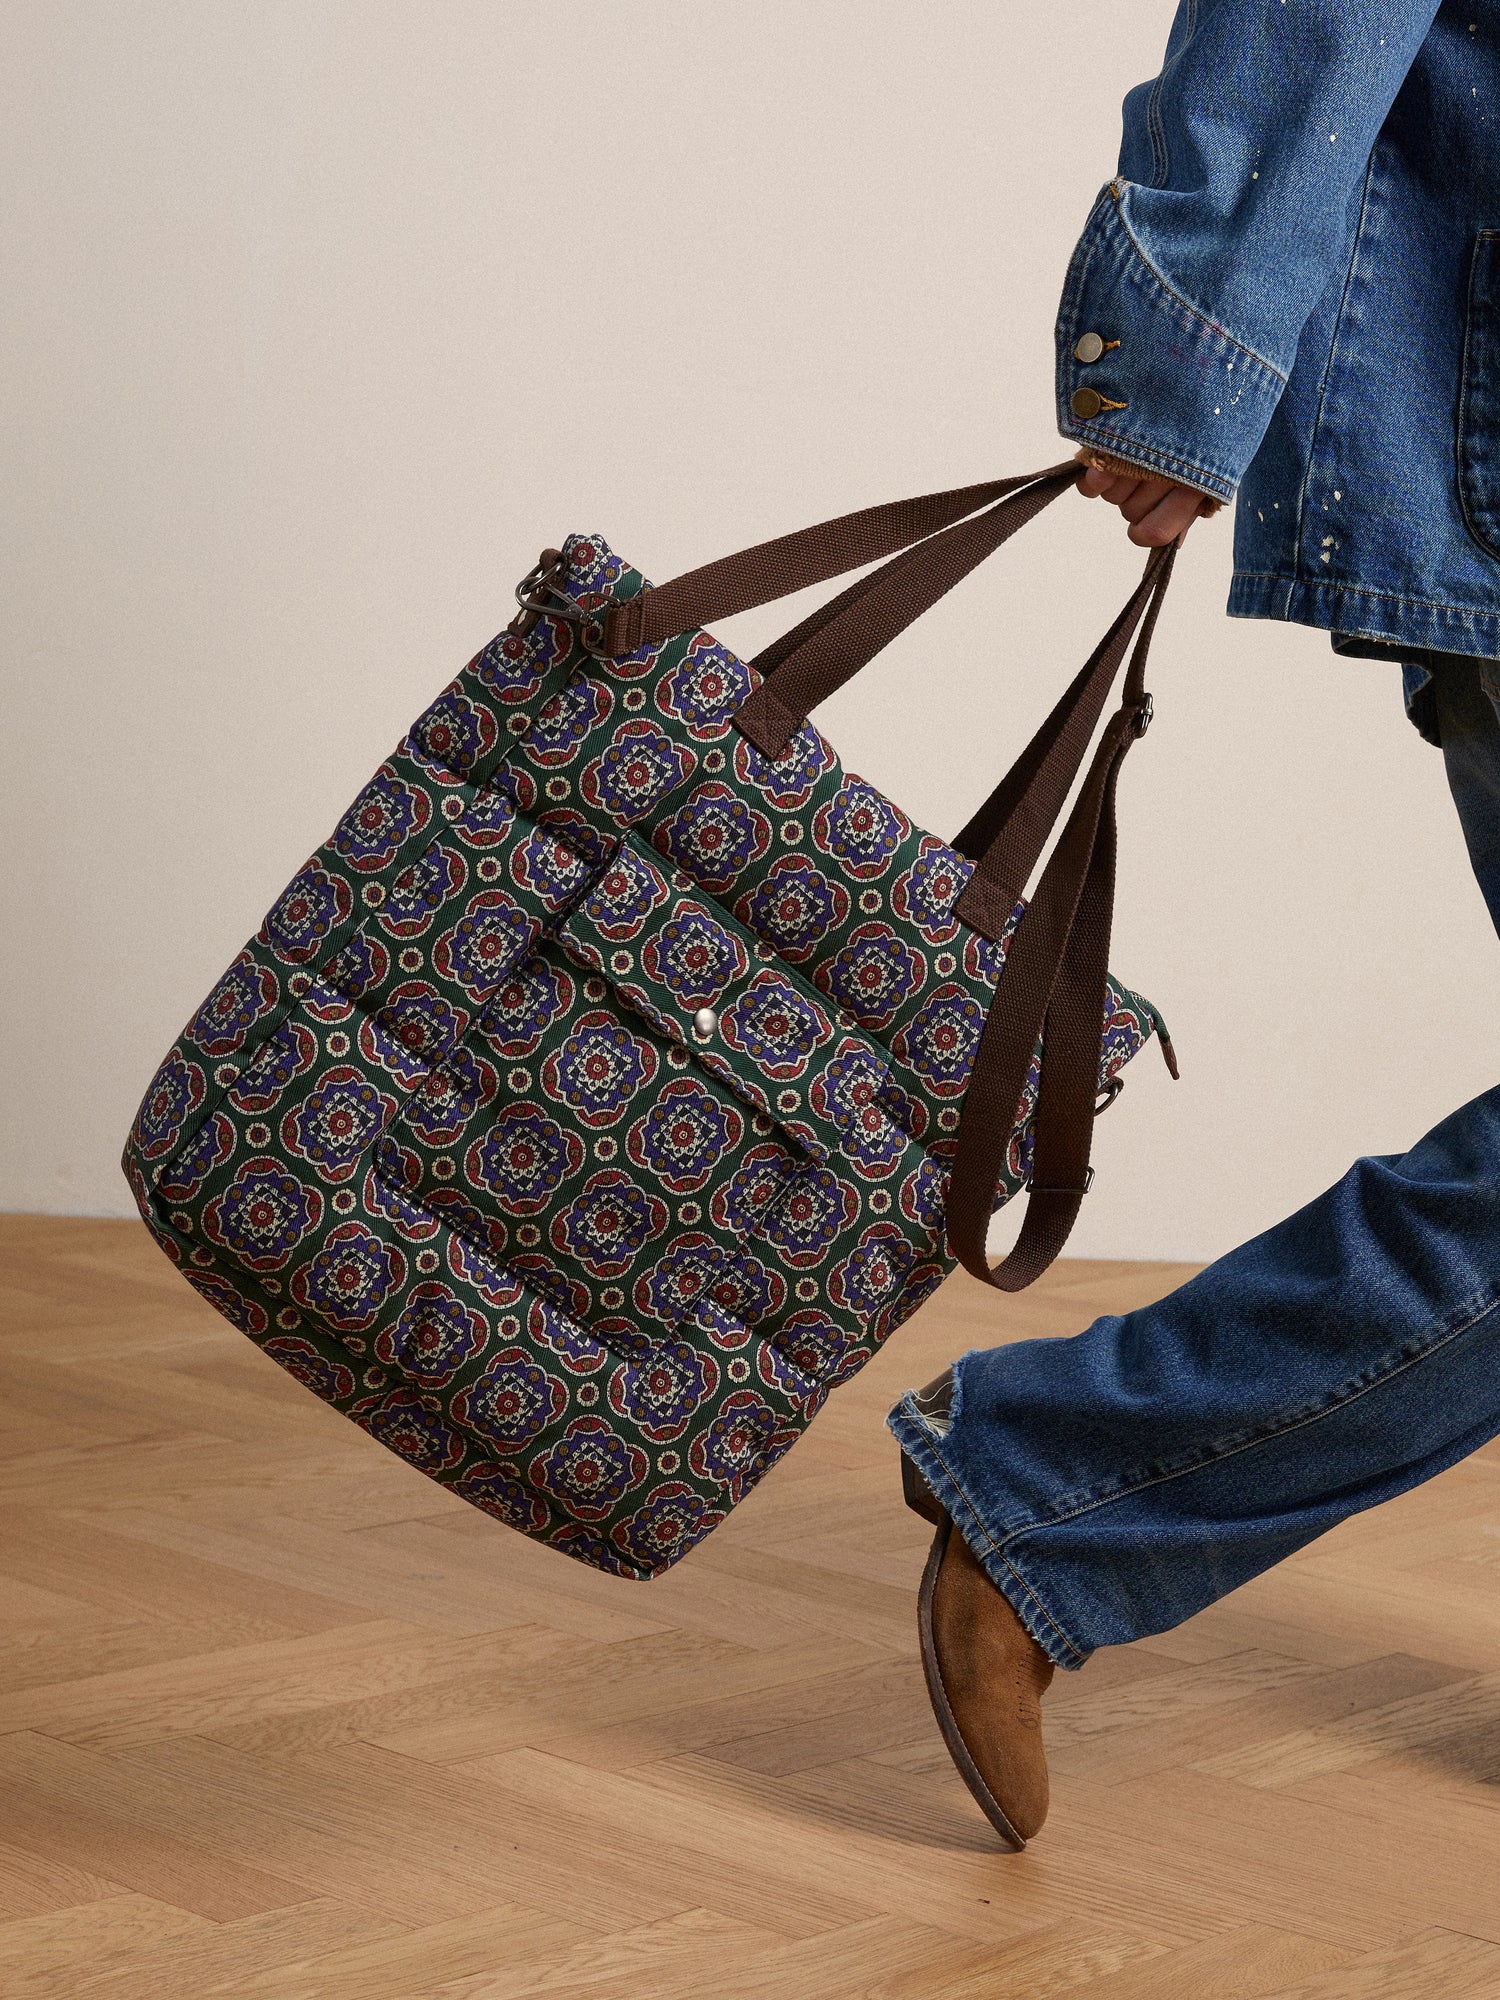 A man is carrying a quilted Profound Pine Mosaic Bag with a pattern on it.